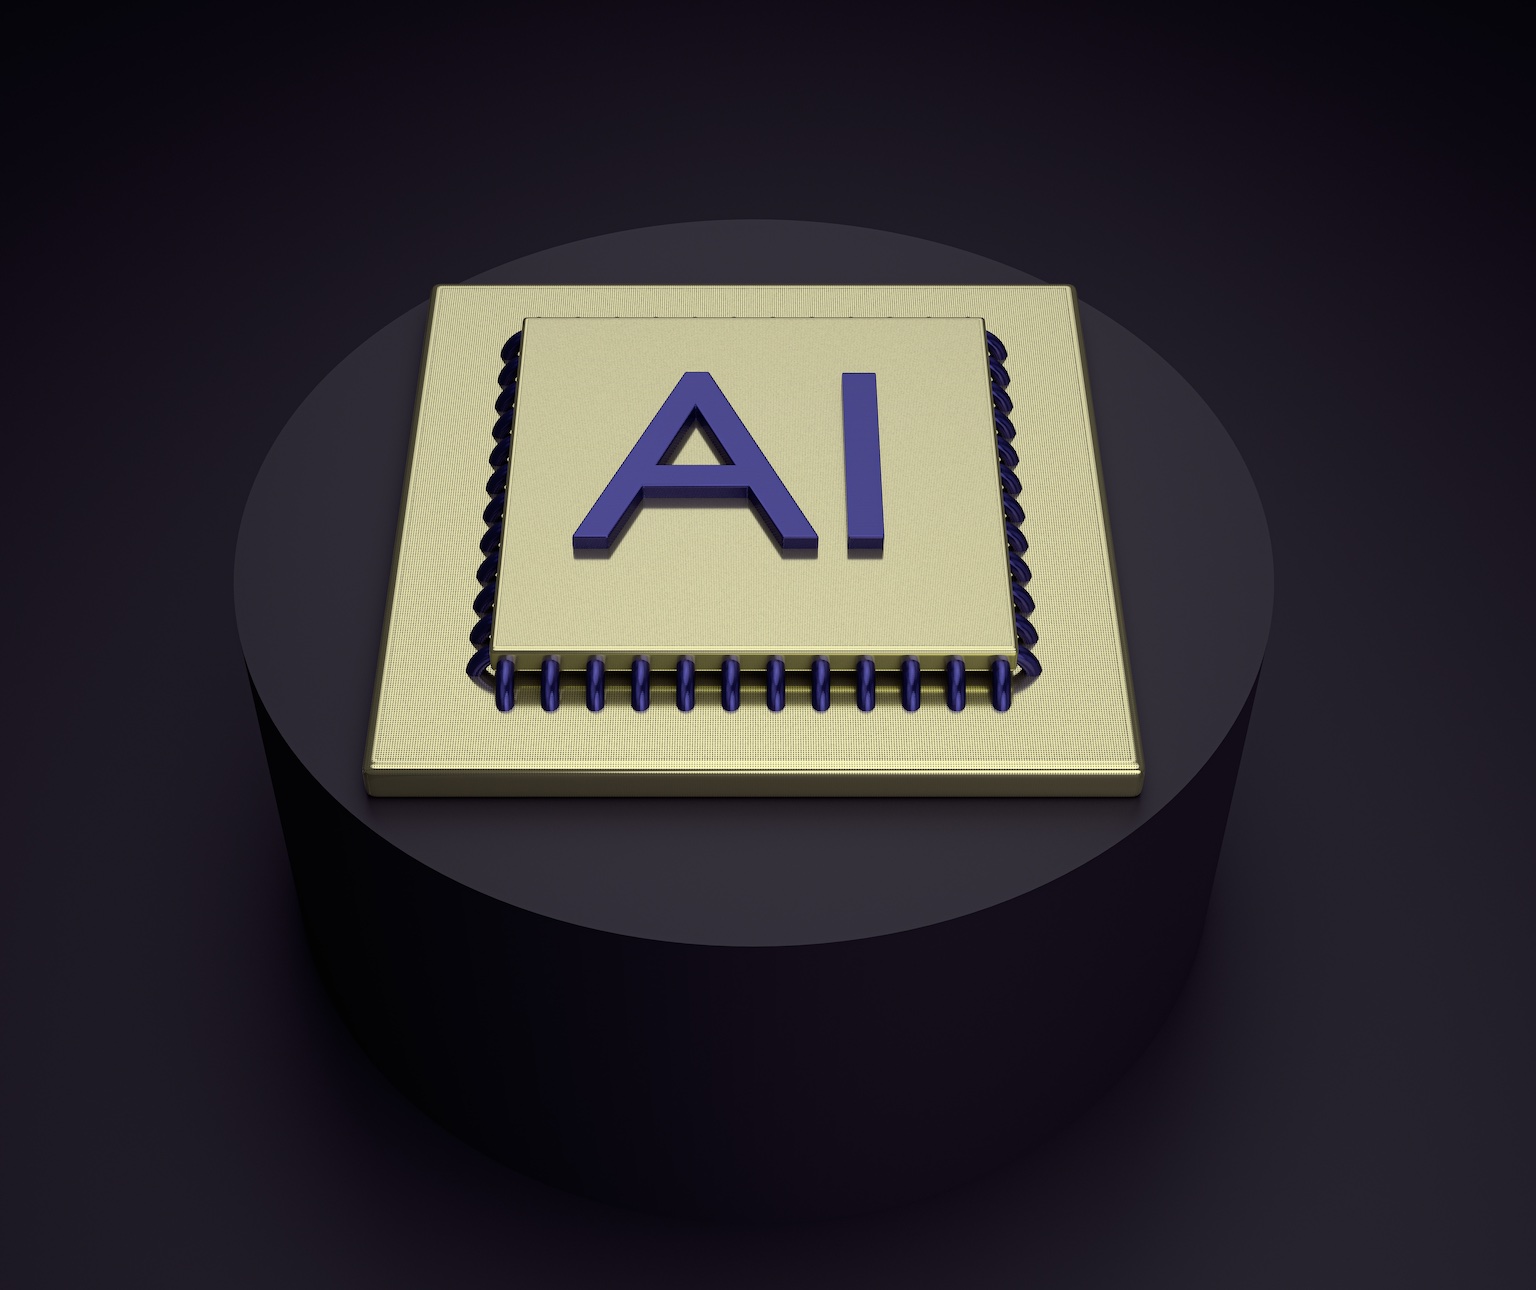 AI in blue letters on gold chip; image by Mohamed Nohassi, via Unsplash.com.